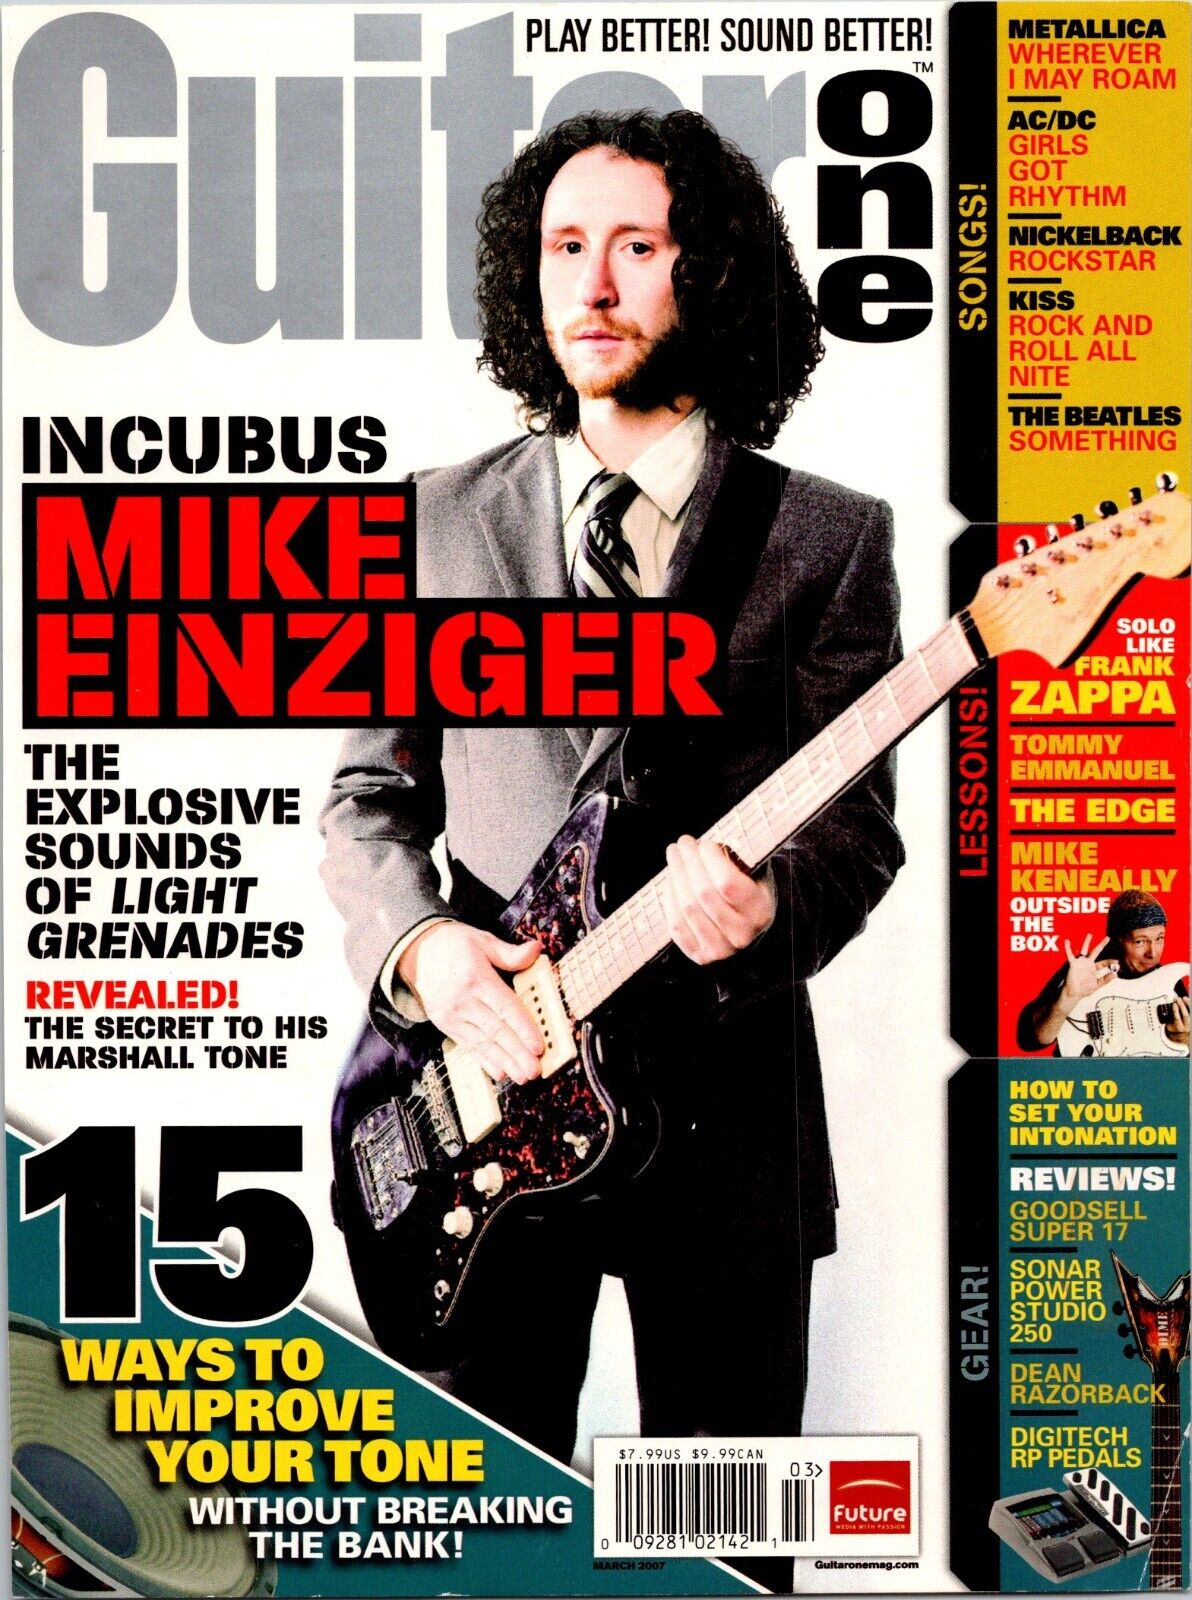 Guitar One Cover Mike Einziger Original Print Ad